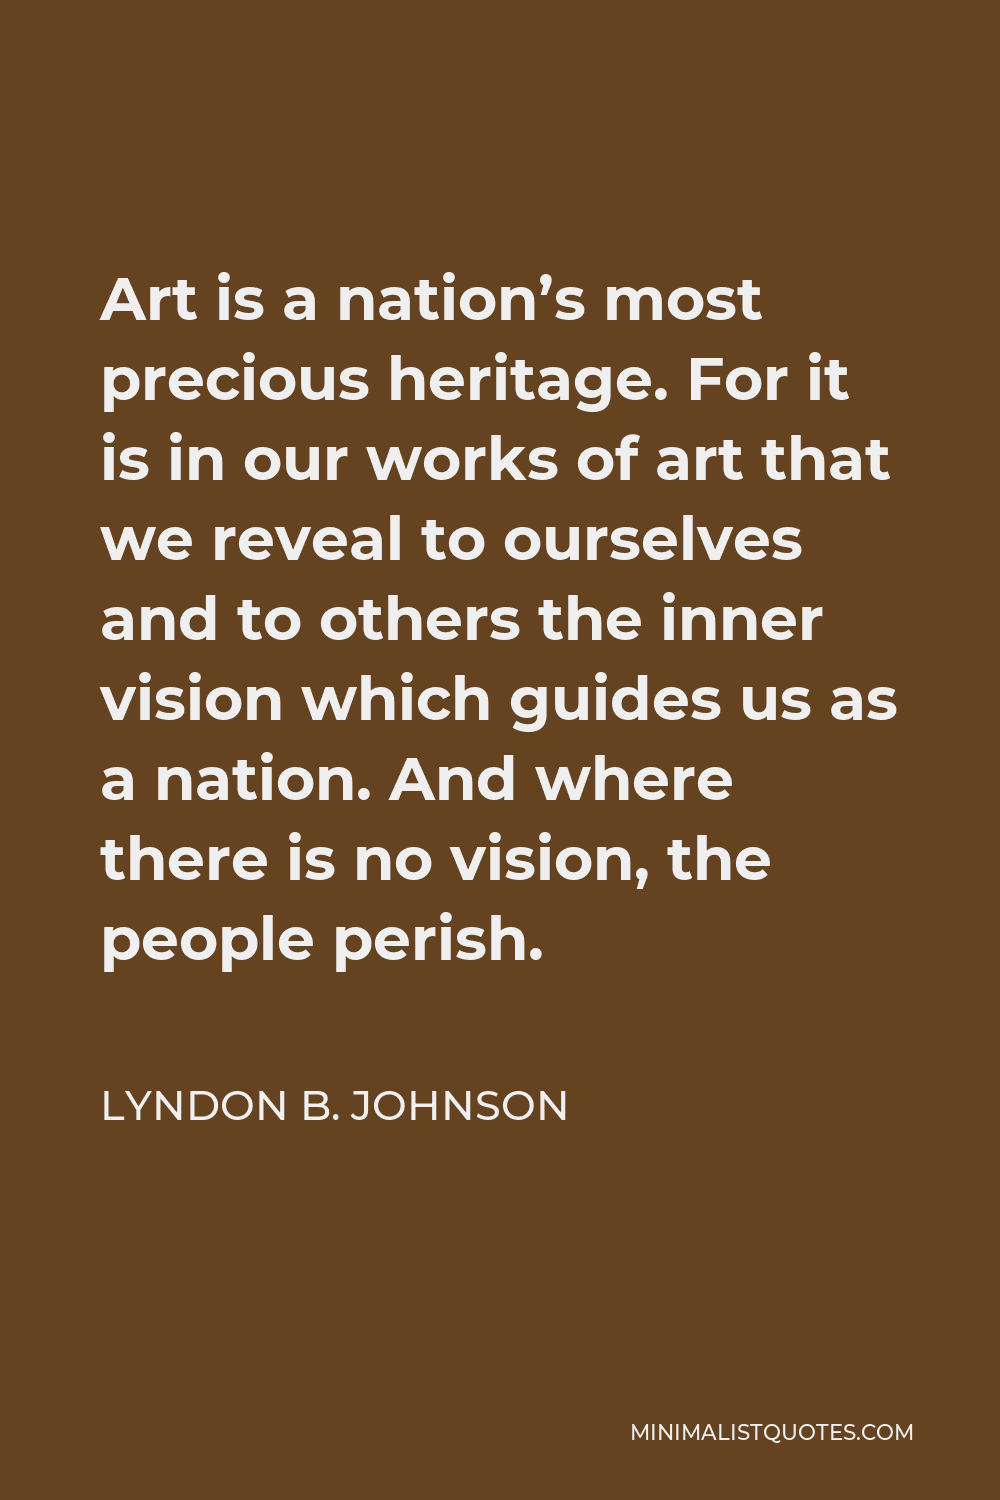 Lyndon B. Johnson Quote - Art is a nation’s most precious heritage. For it is in our works of art that we reveal to ourselves and to others the inner vision which guides us as a nation. And where there is no vision, the people perish.